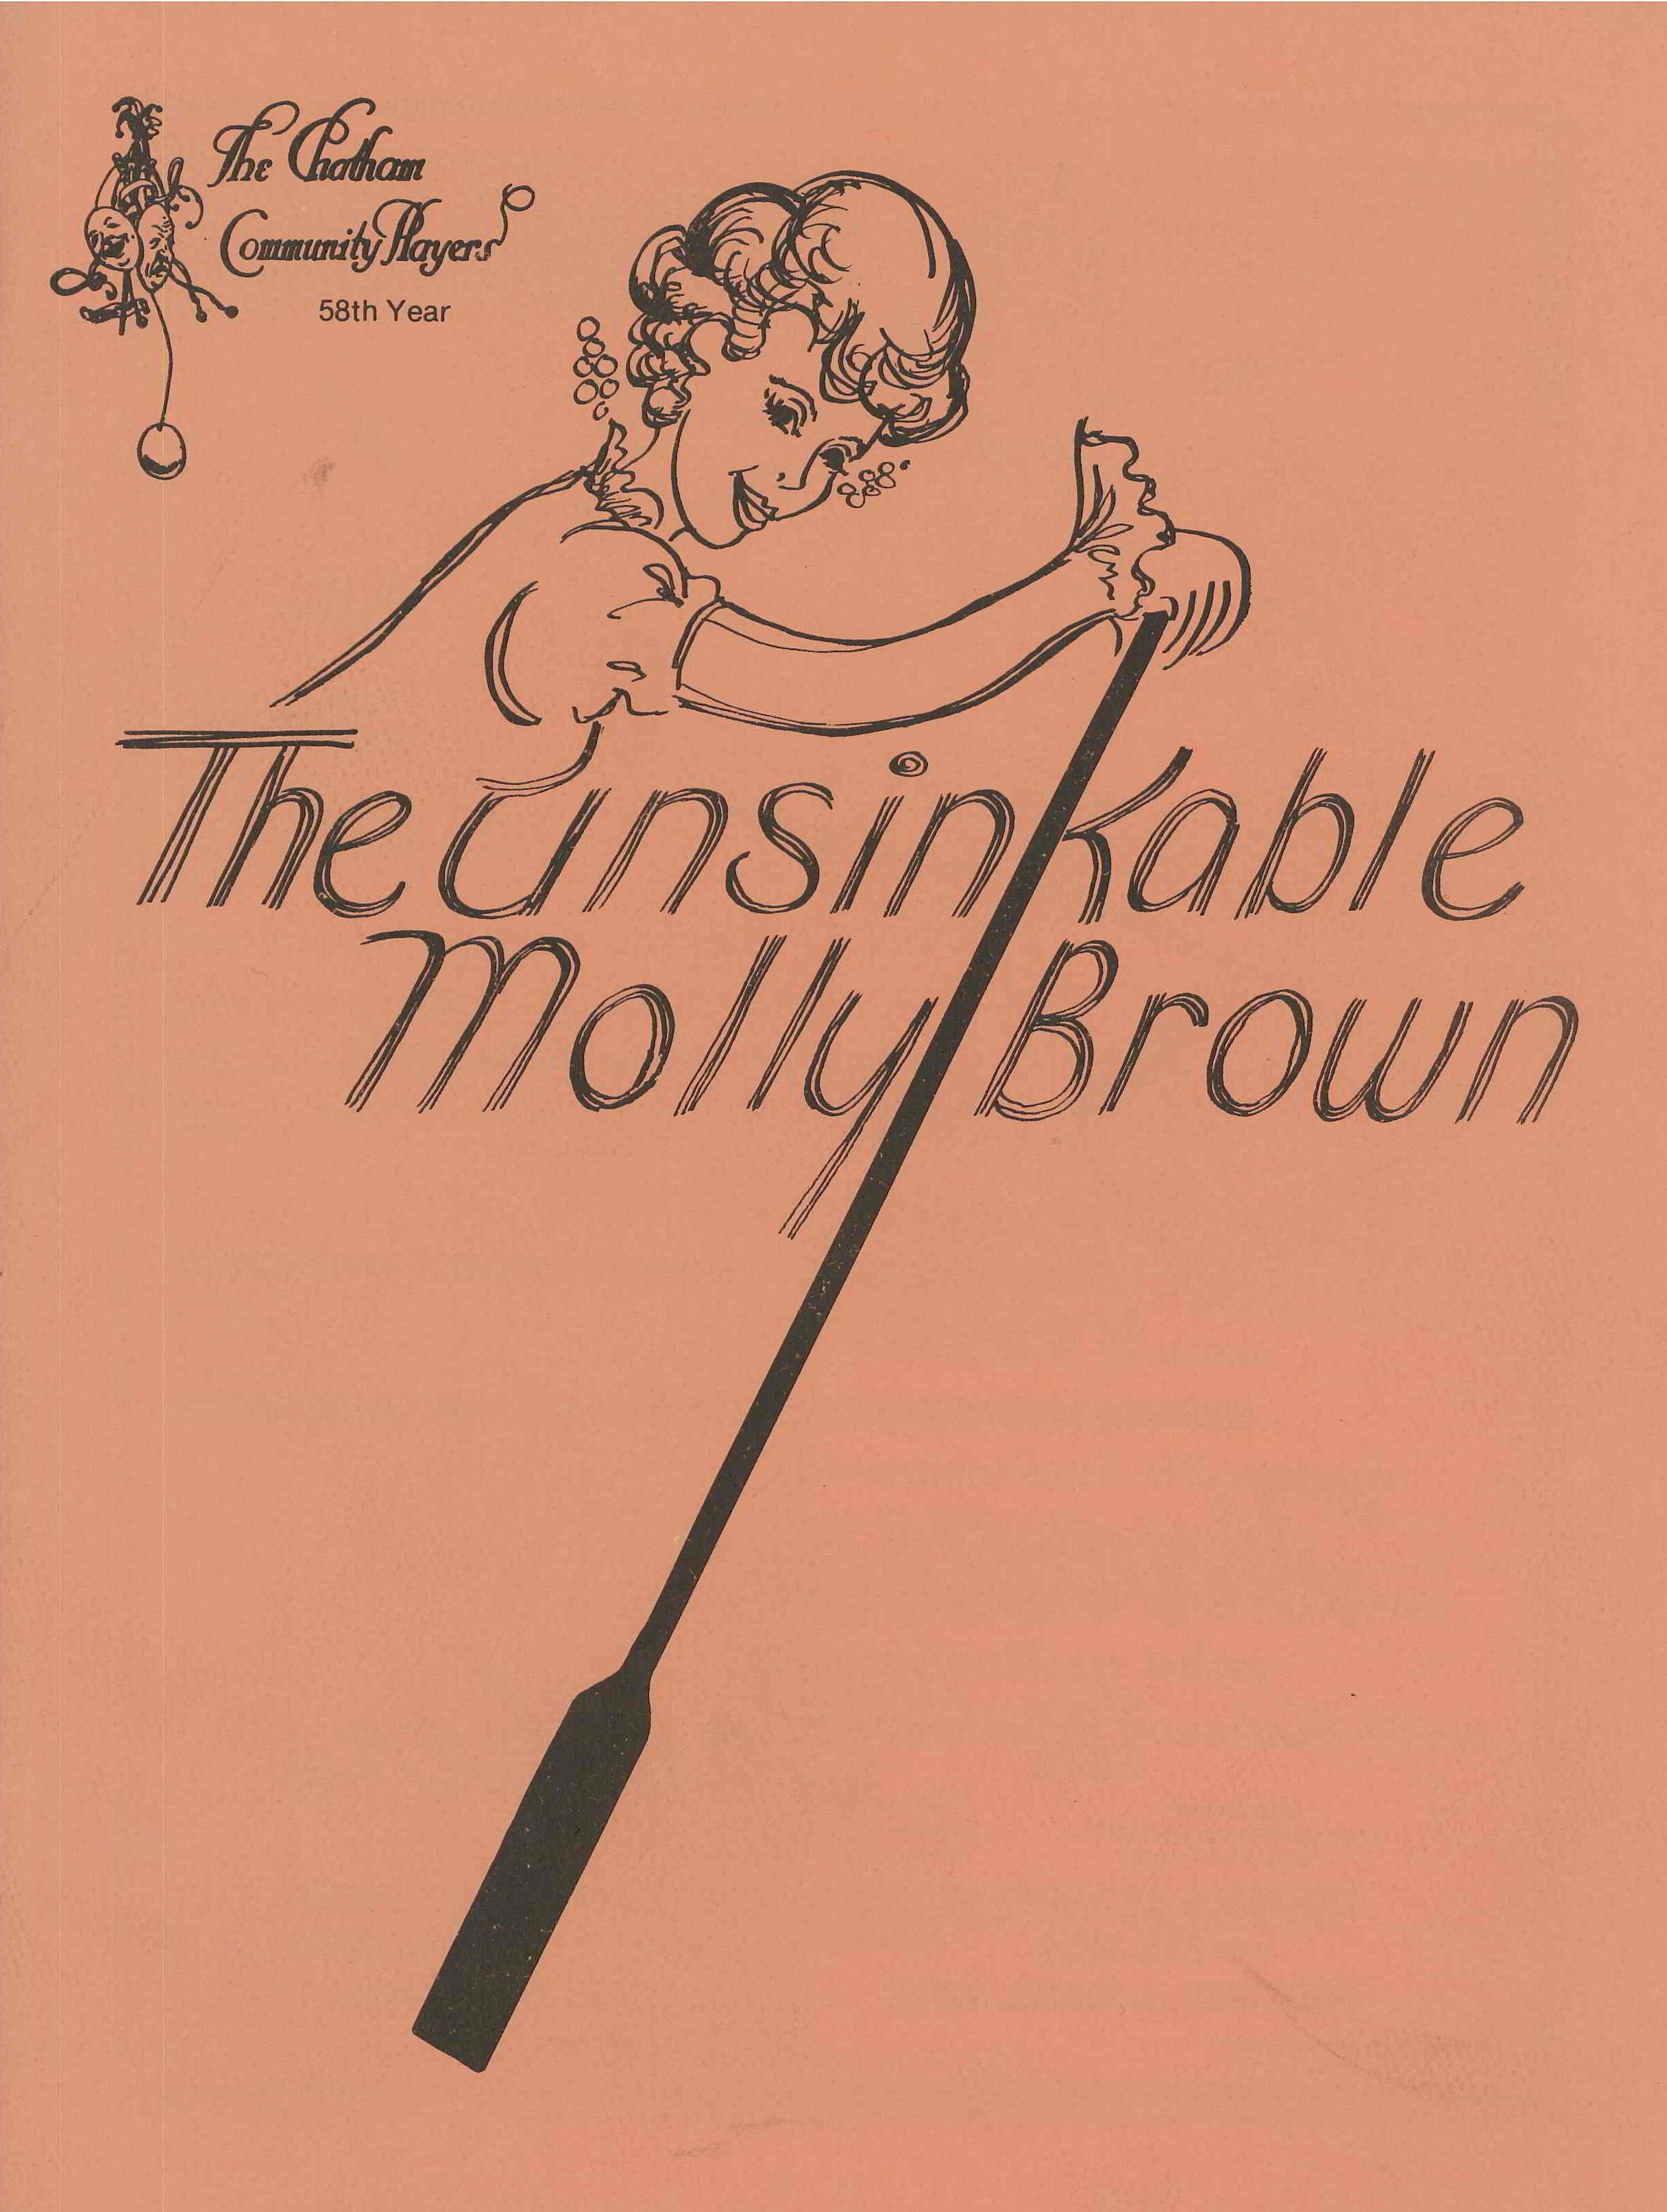 The Unsinkable Molly Brown (1980)